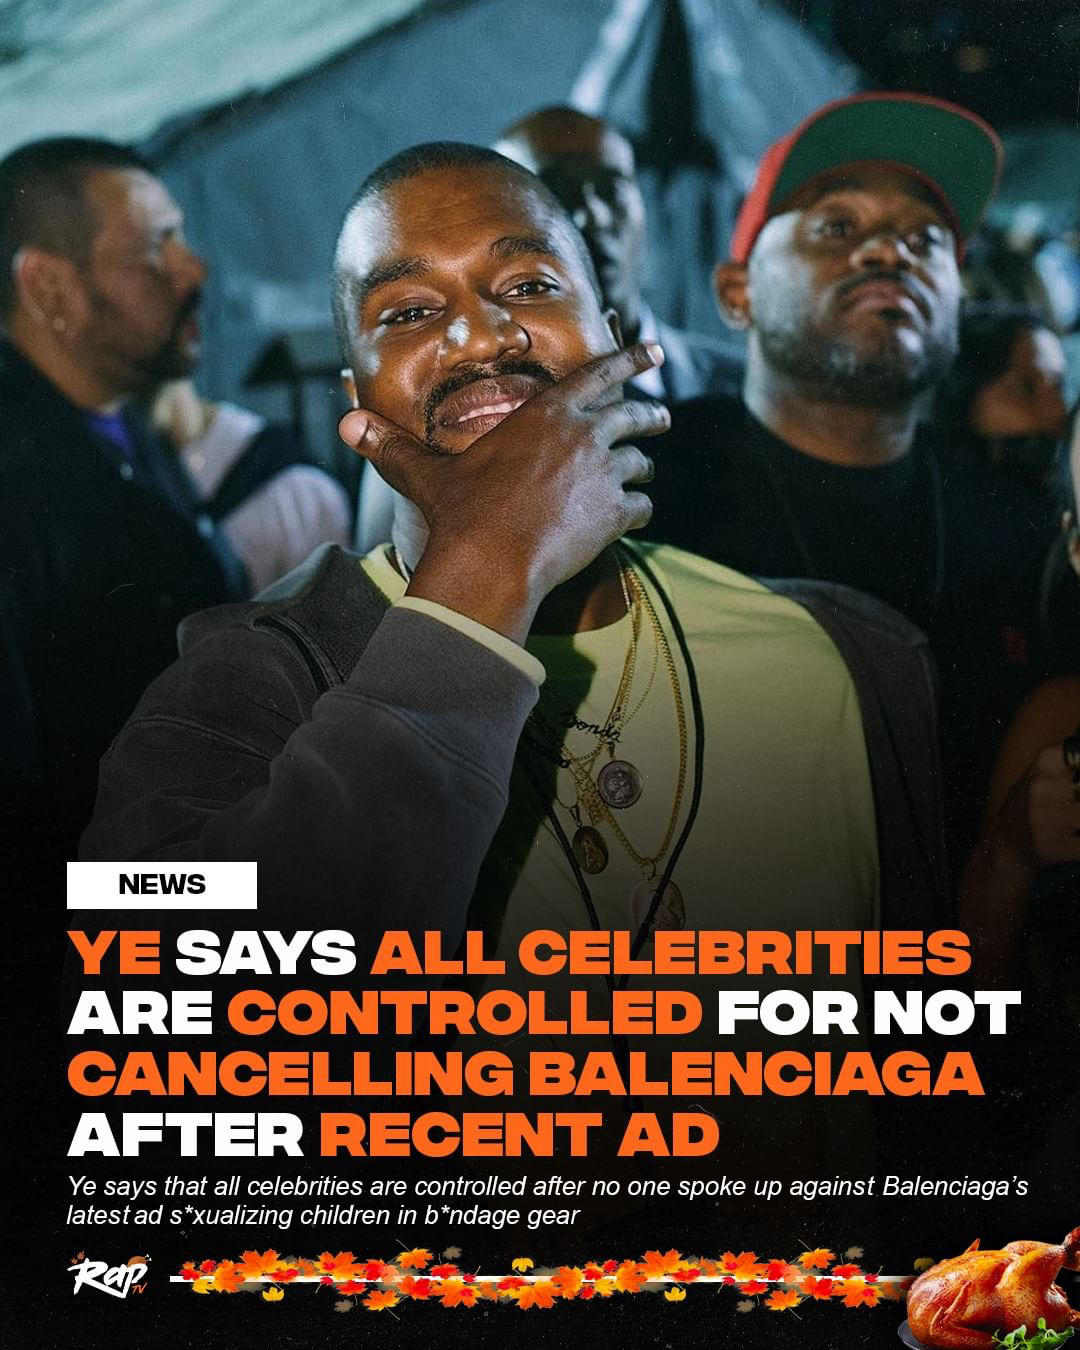 RapTV - #Ye said that all celebrities are controlled after no one cancelled #Balenciaga for their